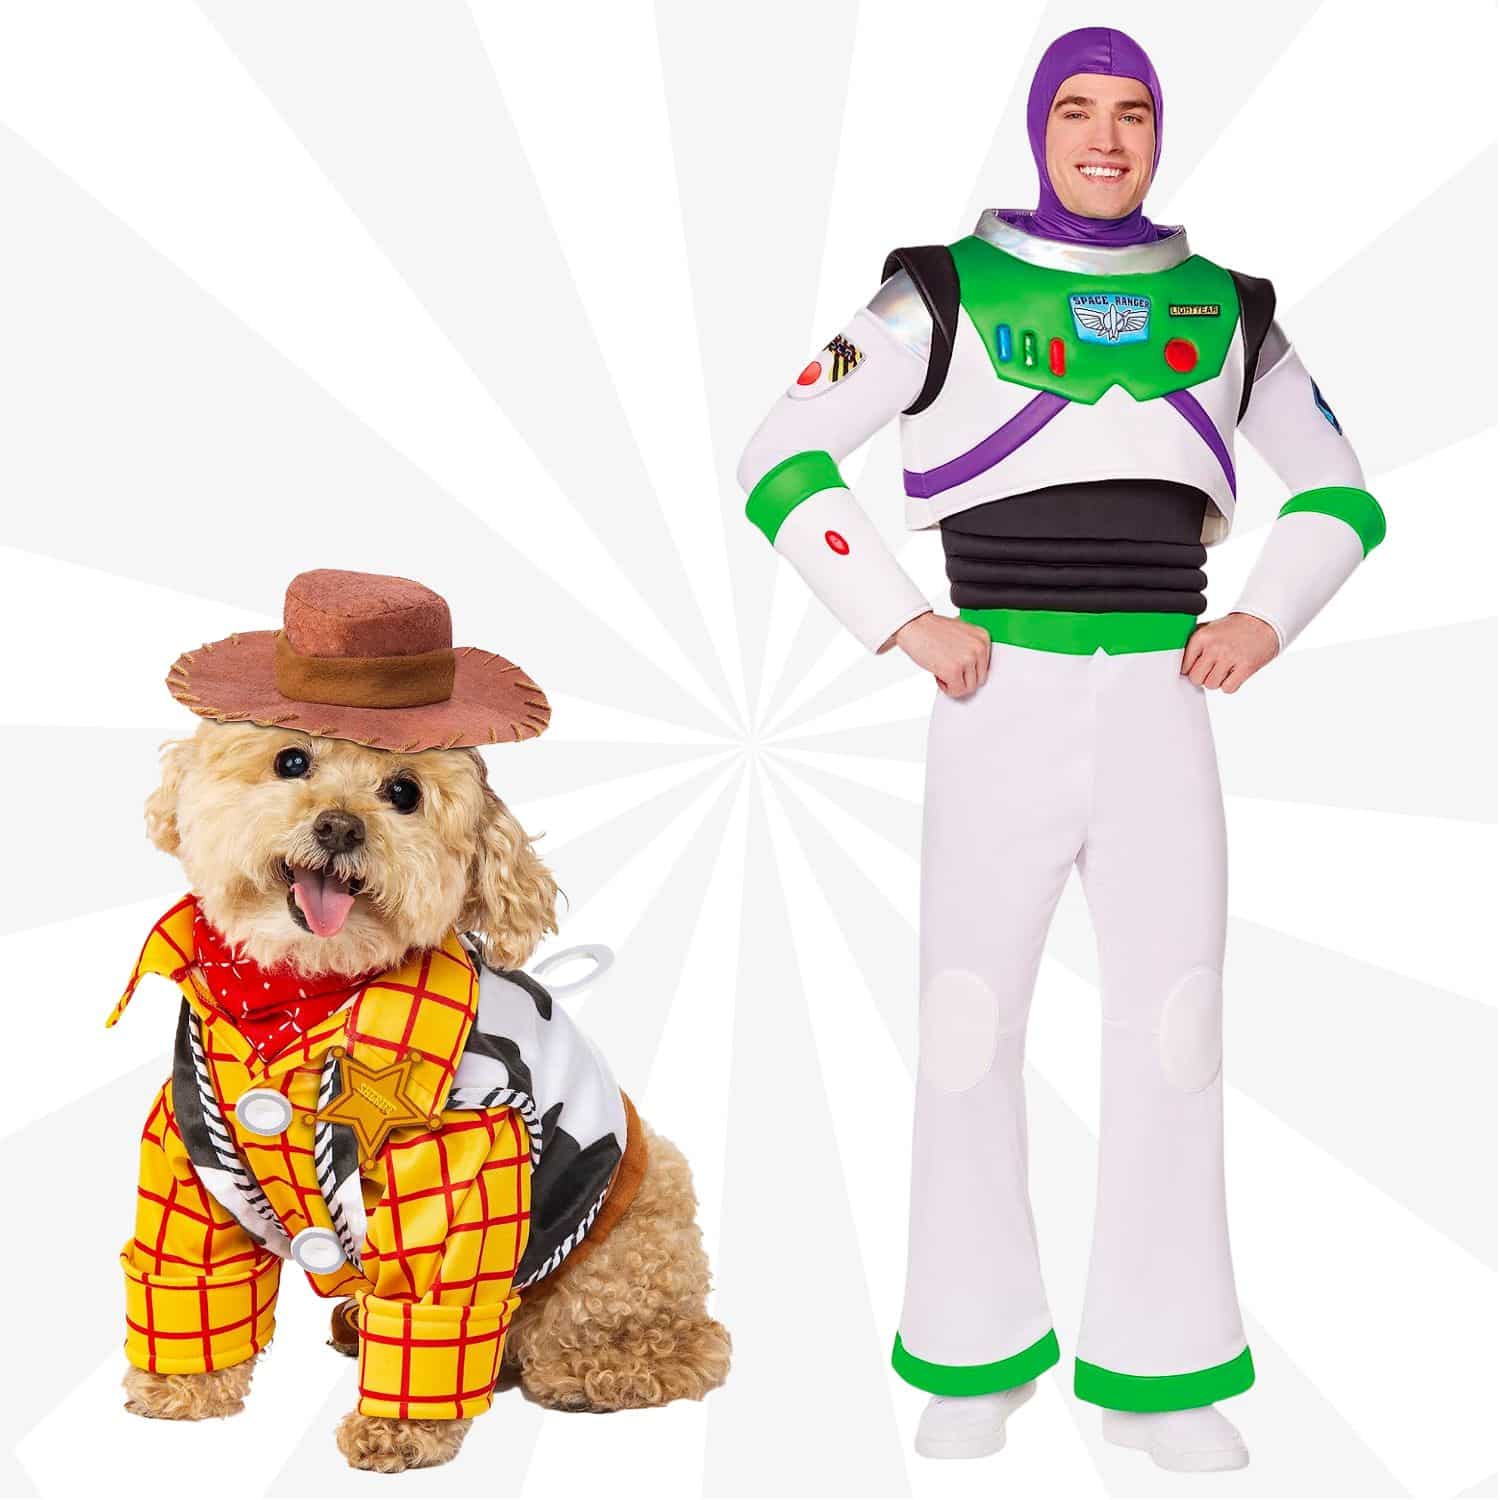 Woody and Buzz Lightyear - dog Christmas ornaments | PawCool ™